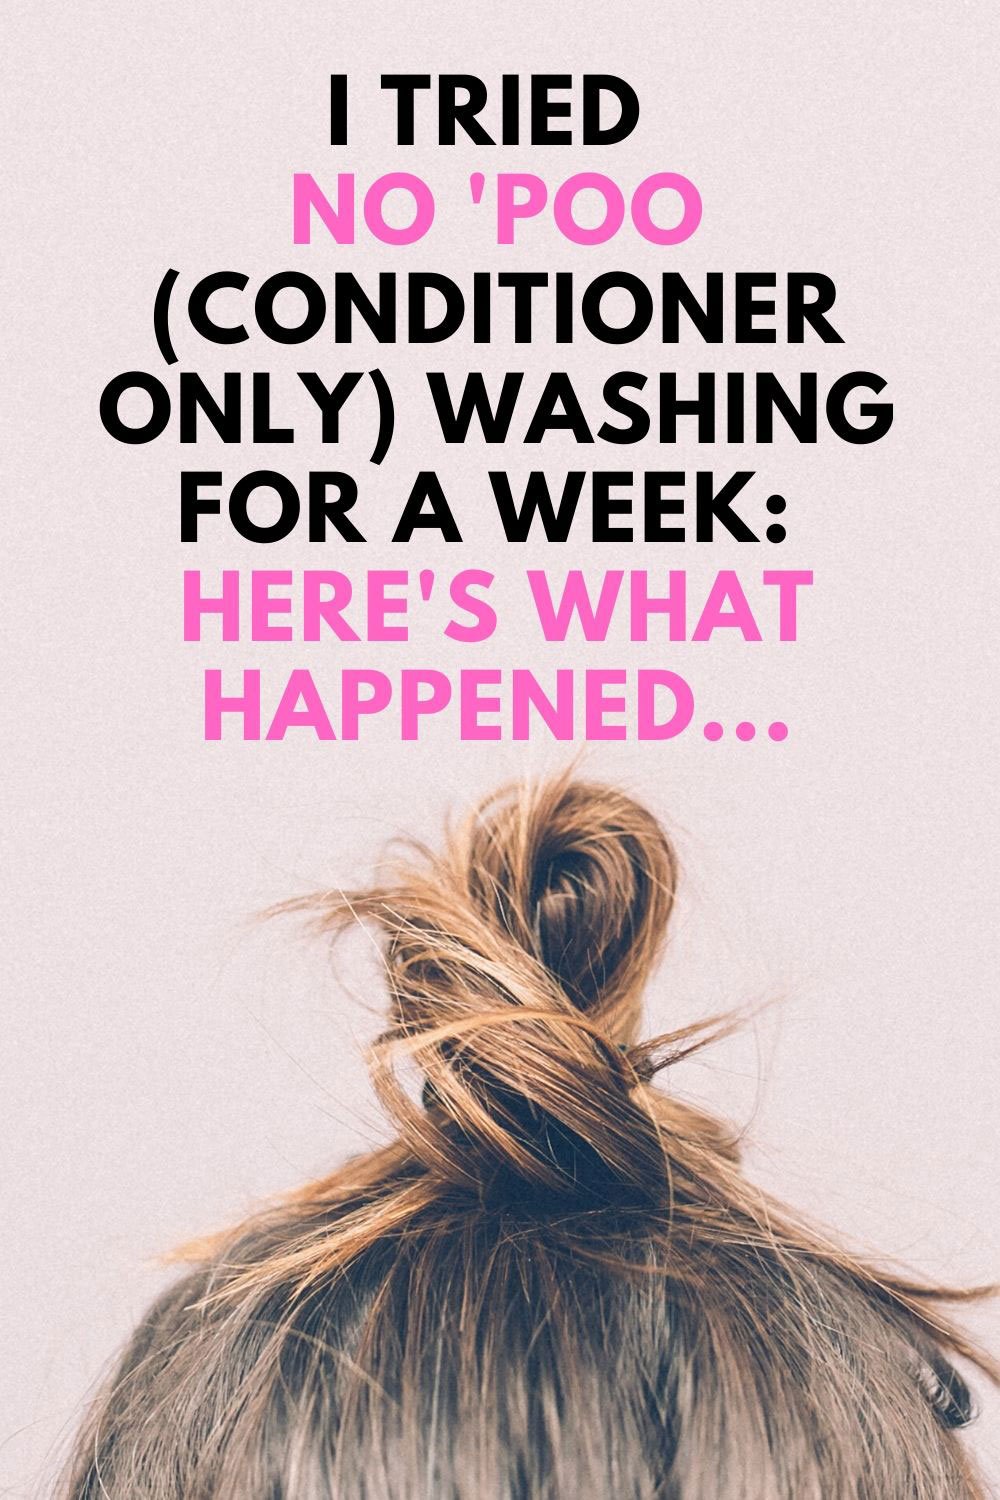 No 'Poo: I tried co-washing for a week - here's what happened